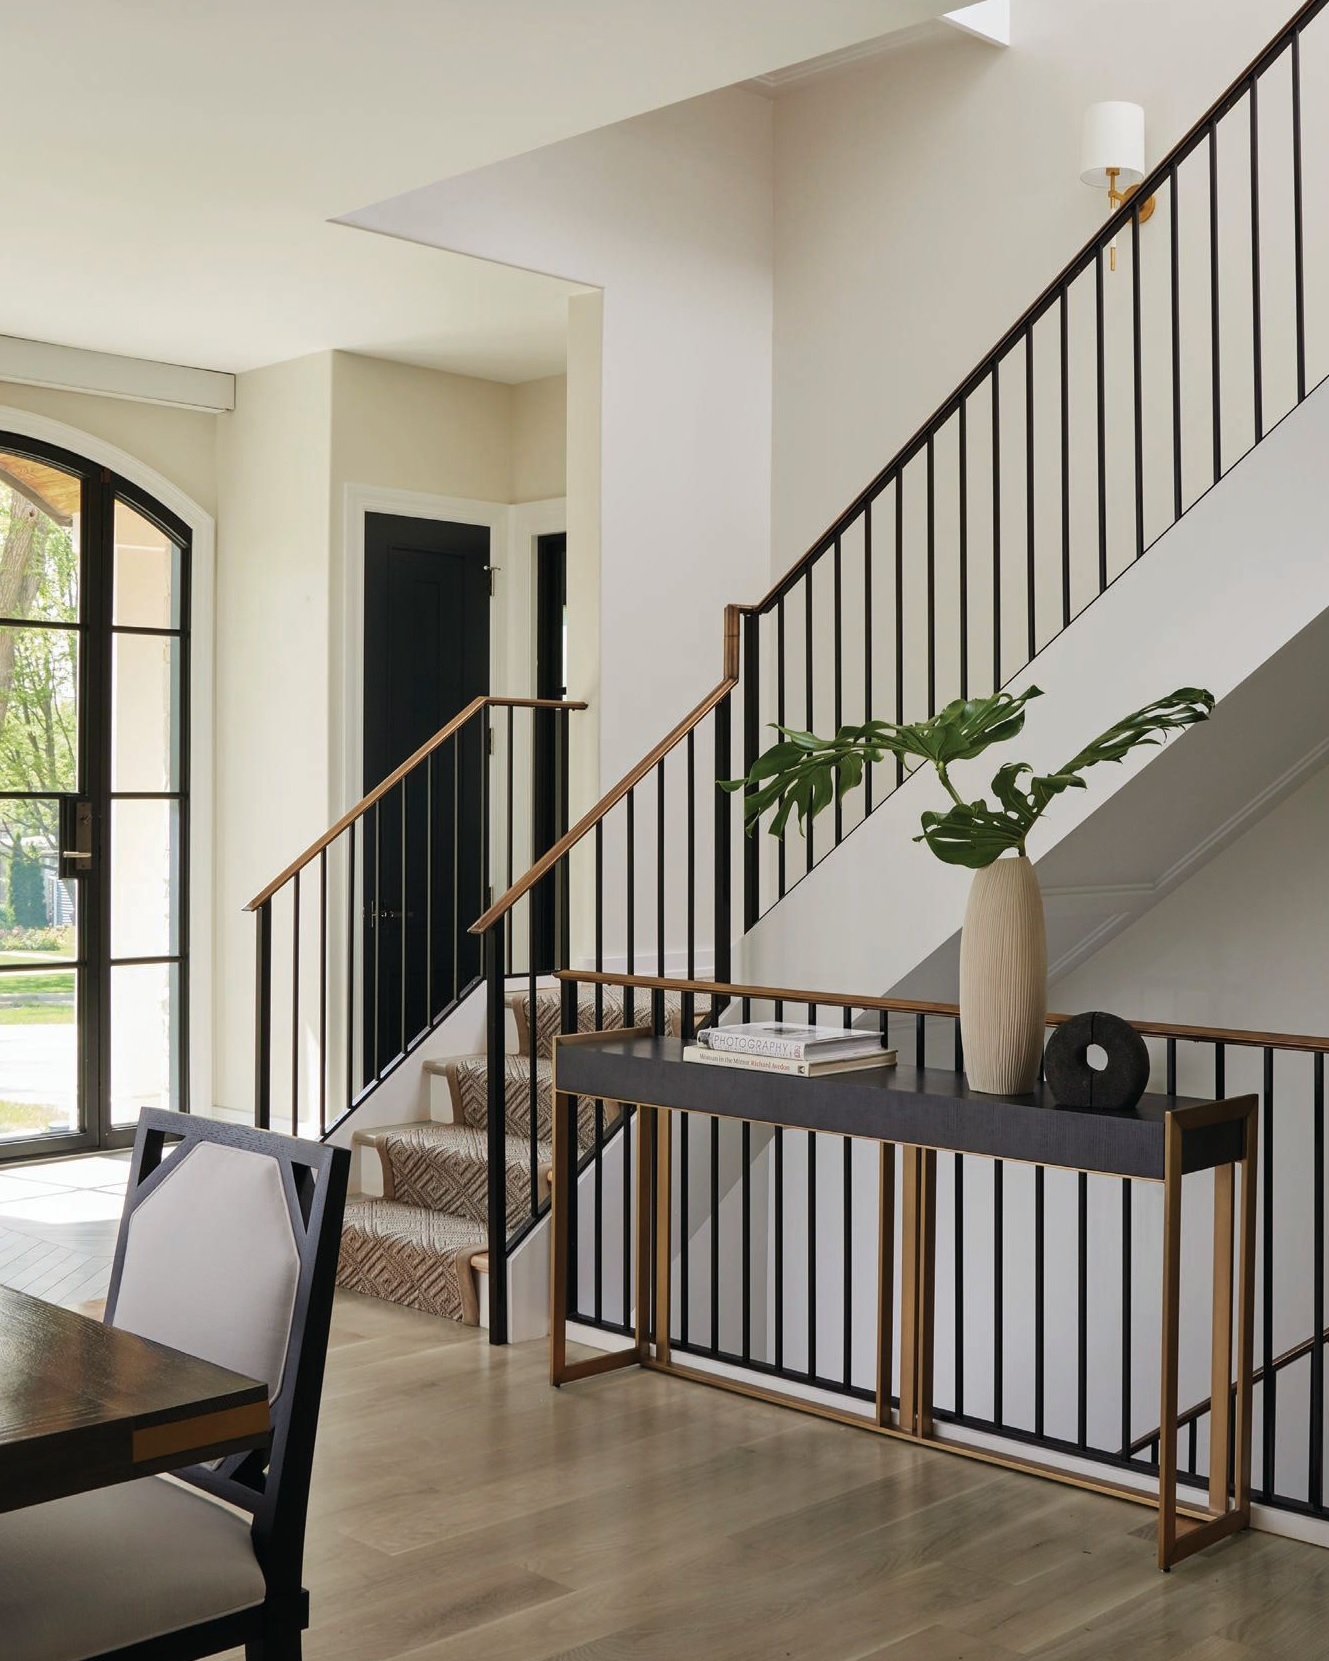 The foyer features 7-inch white oak floors by Apex Flooring and a black iron stair railing by Step 1 Stairworks. Photographed by Werner Straube